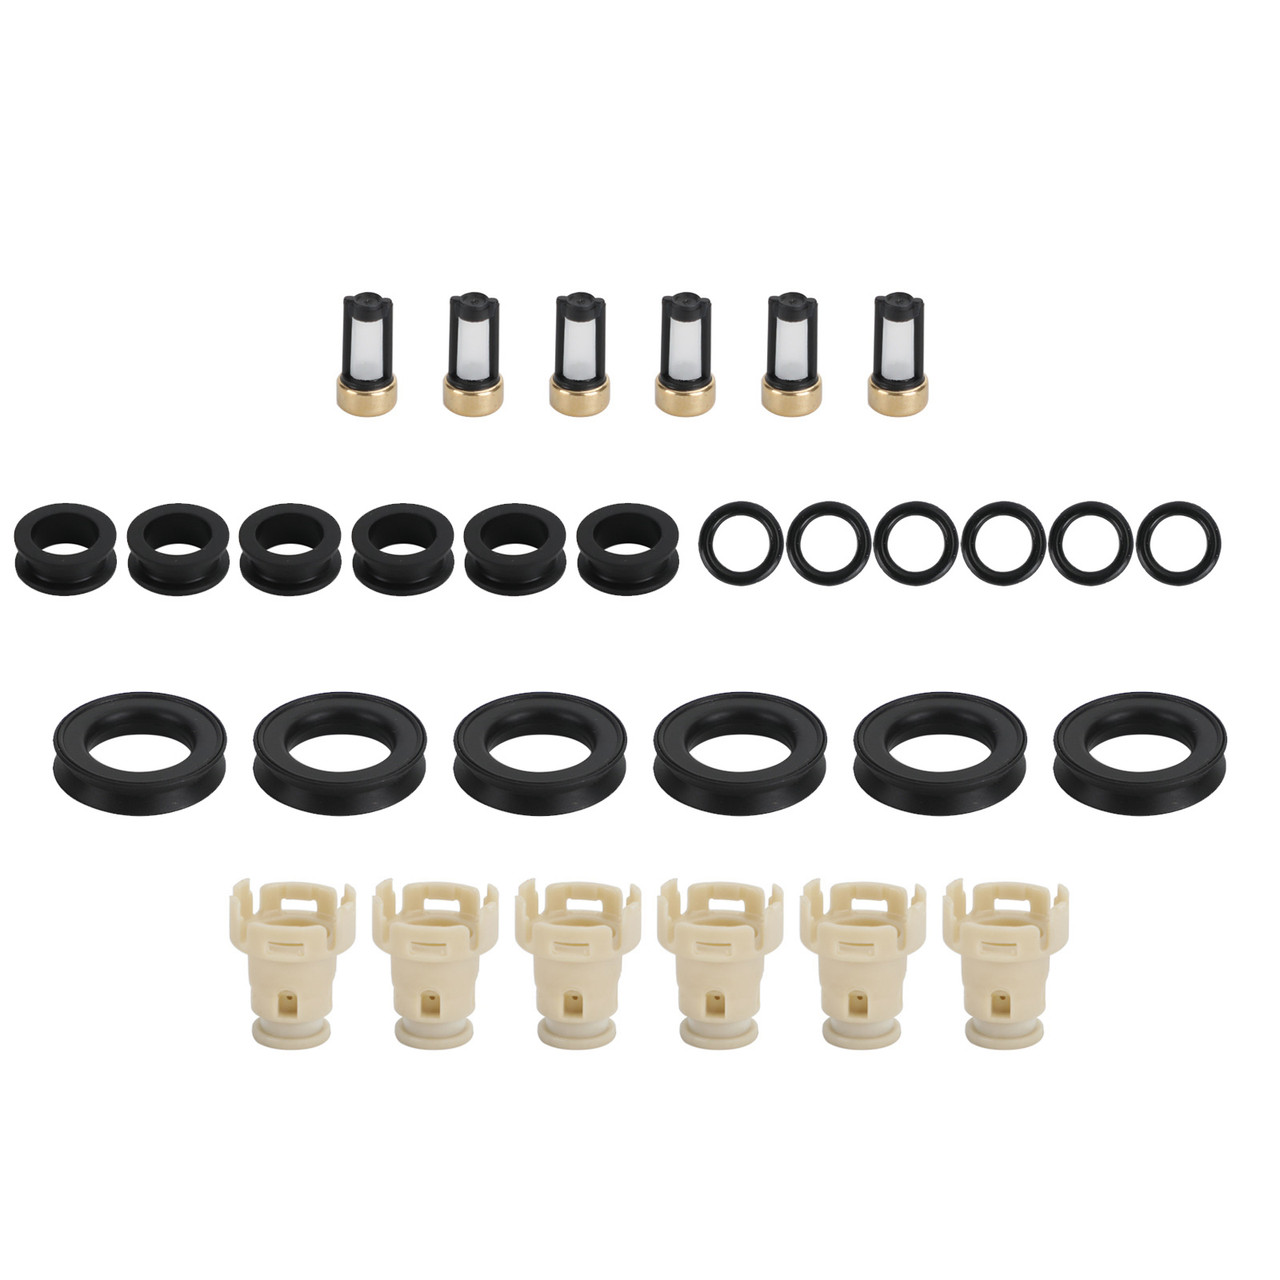 6PCS Fuel Injectors Rebuild kit o-rings Seals Filters Caps Fit For Toyota 4Runner 1999-2002 Tacoma 1999-2004 Tundra 2000-2004